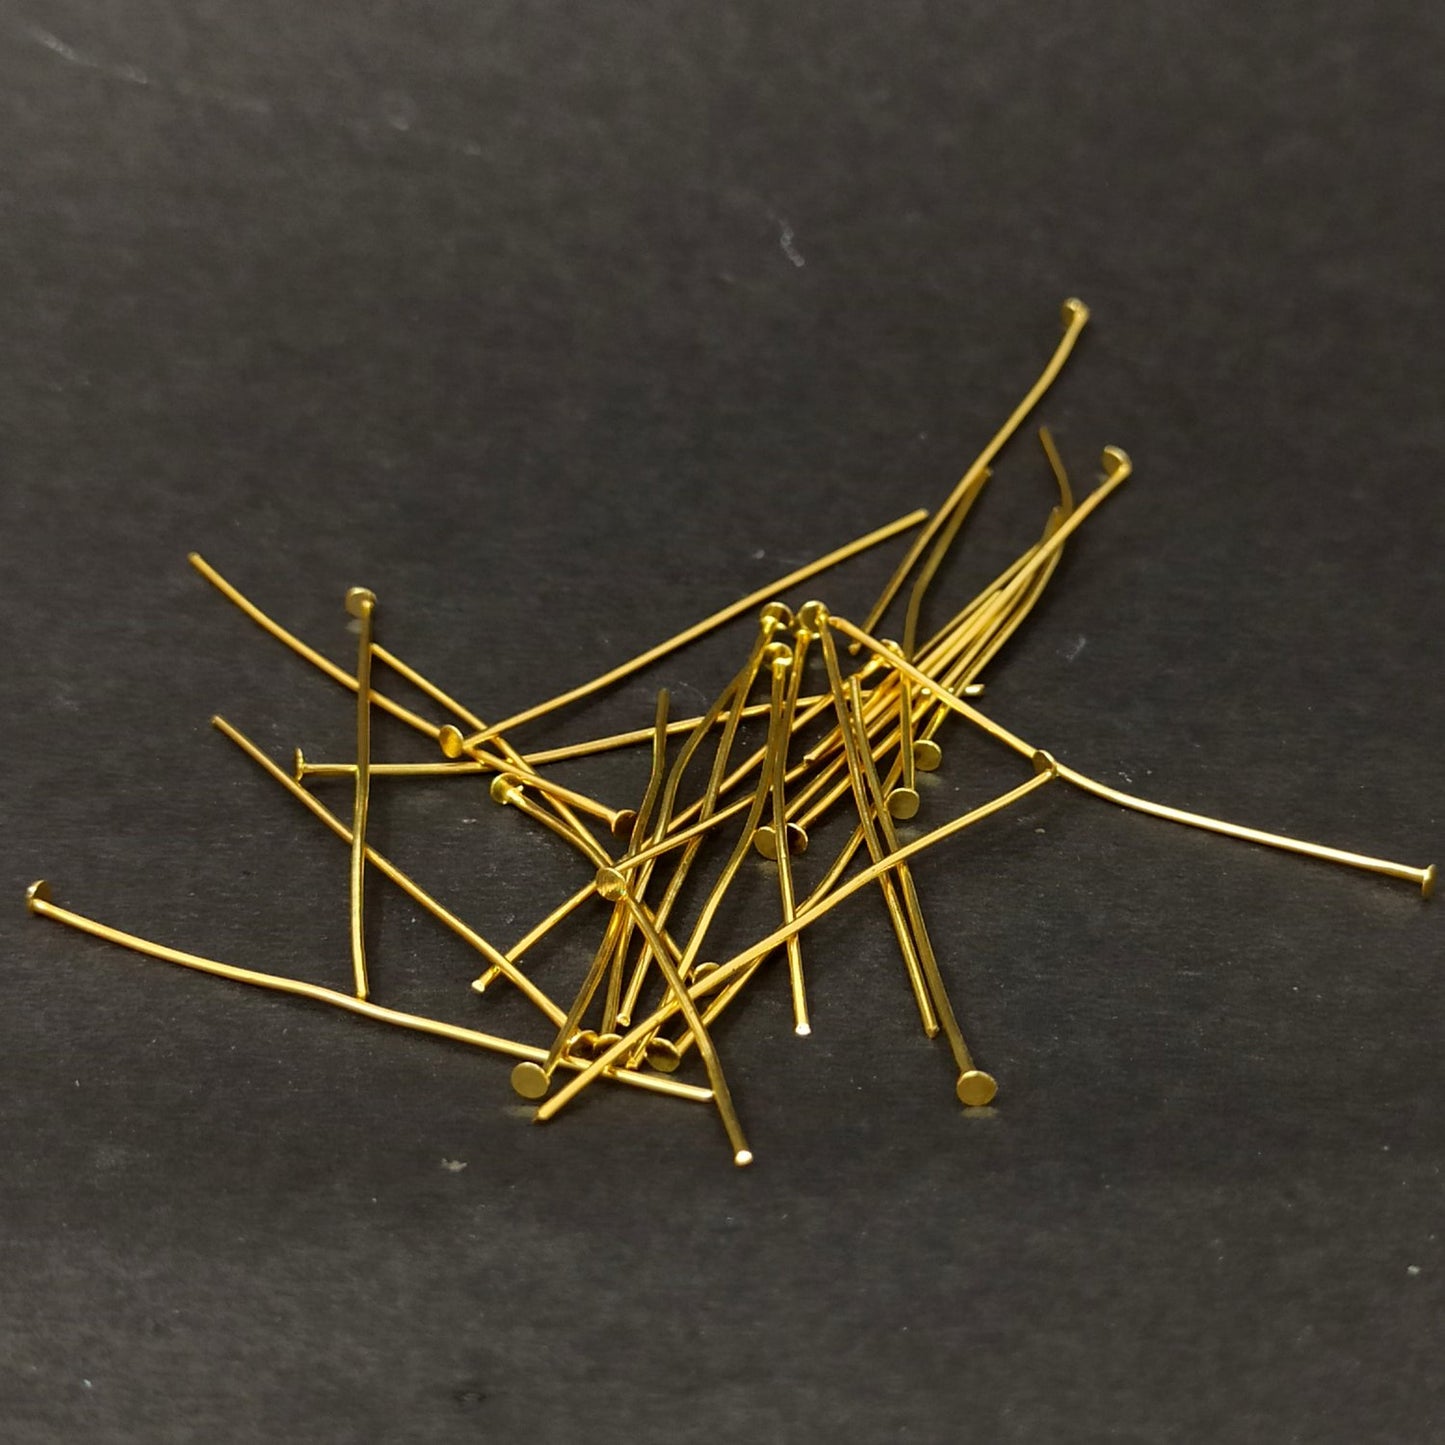 5 cm Golden Head Pins for Making Earrings and Jewellery (25 Pcs) - 96-33